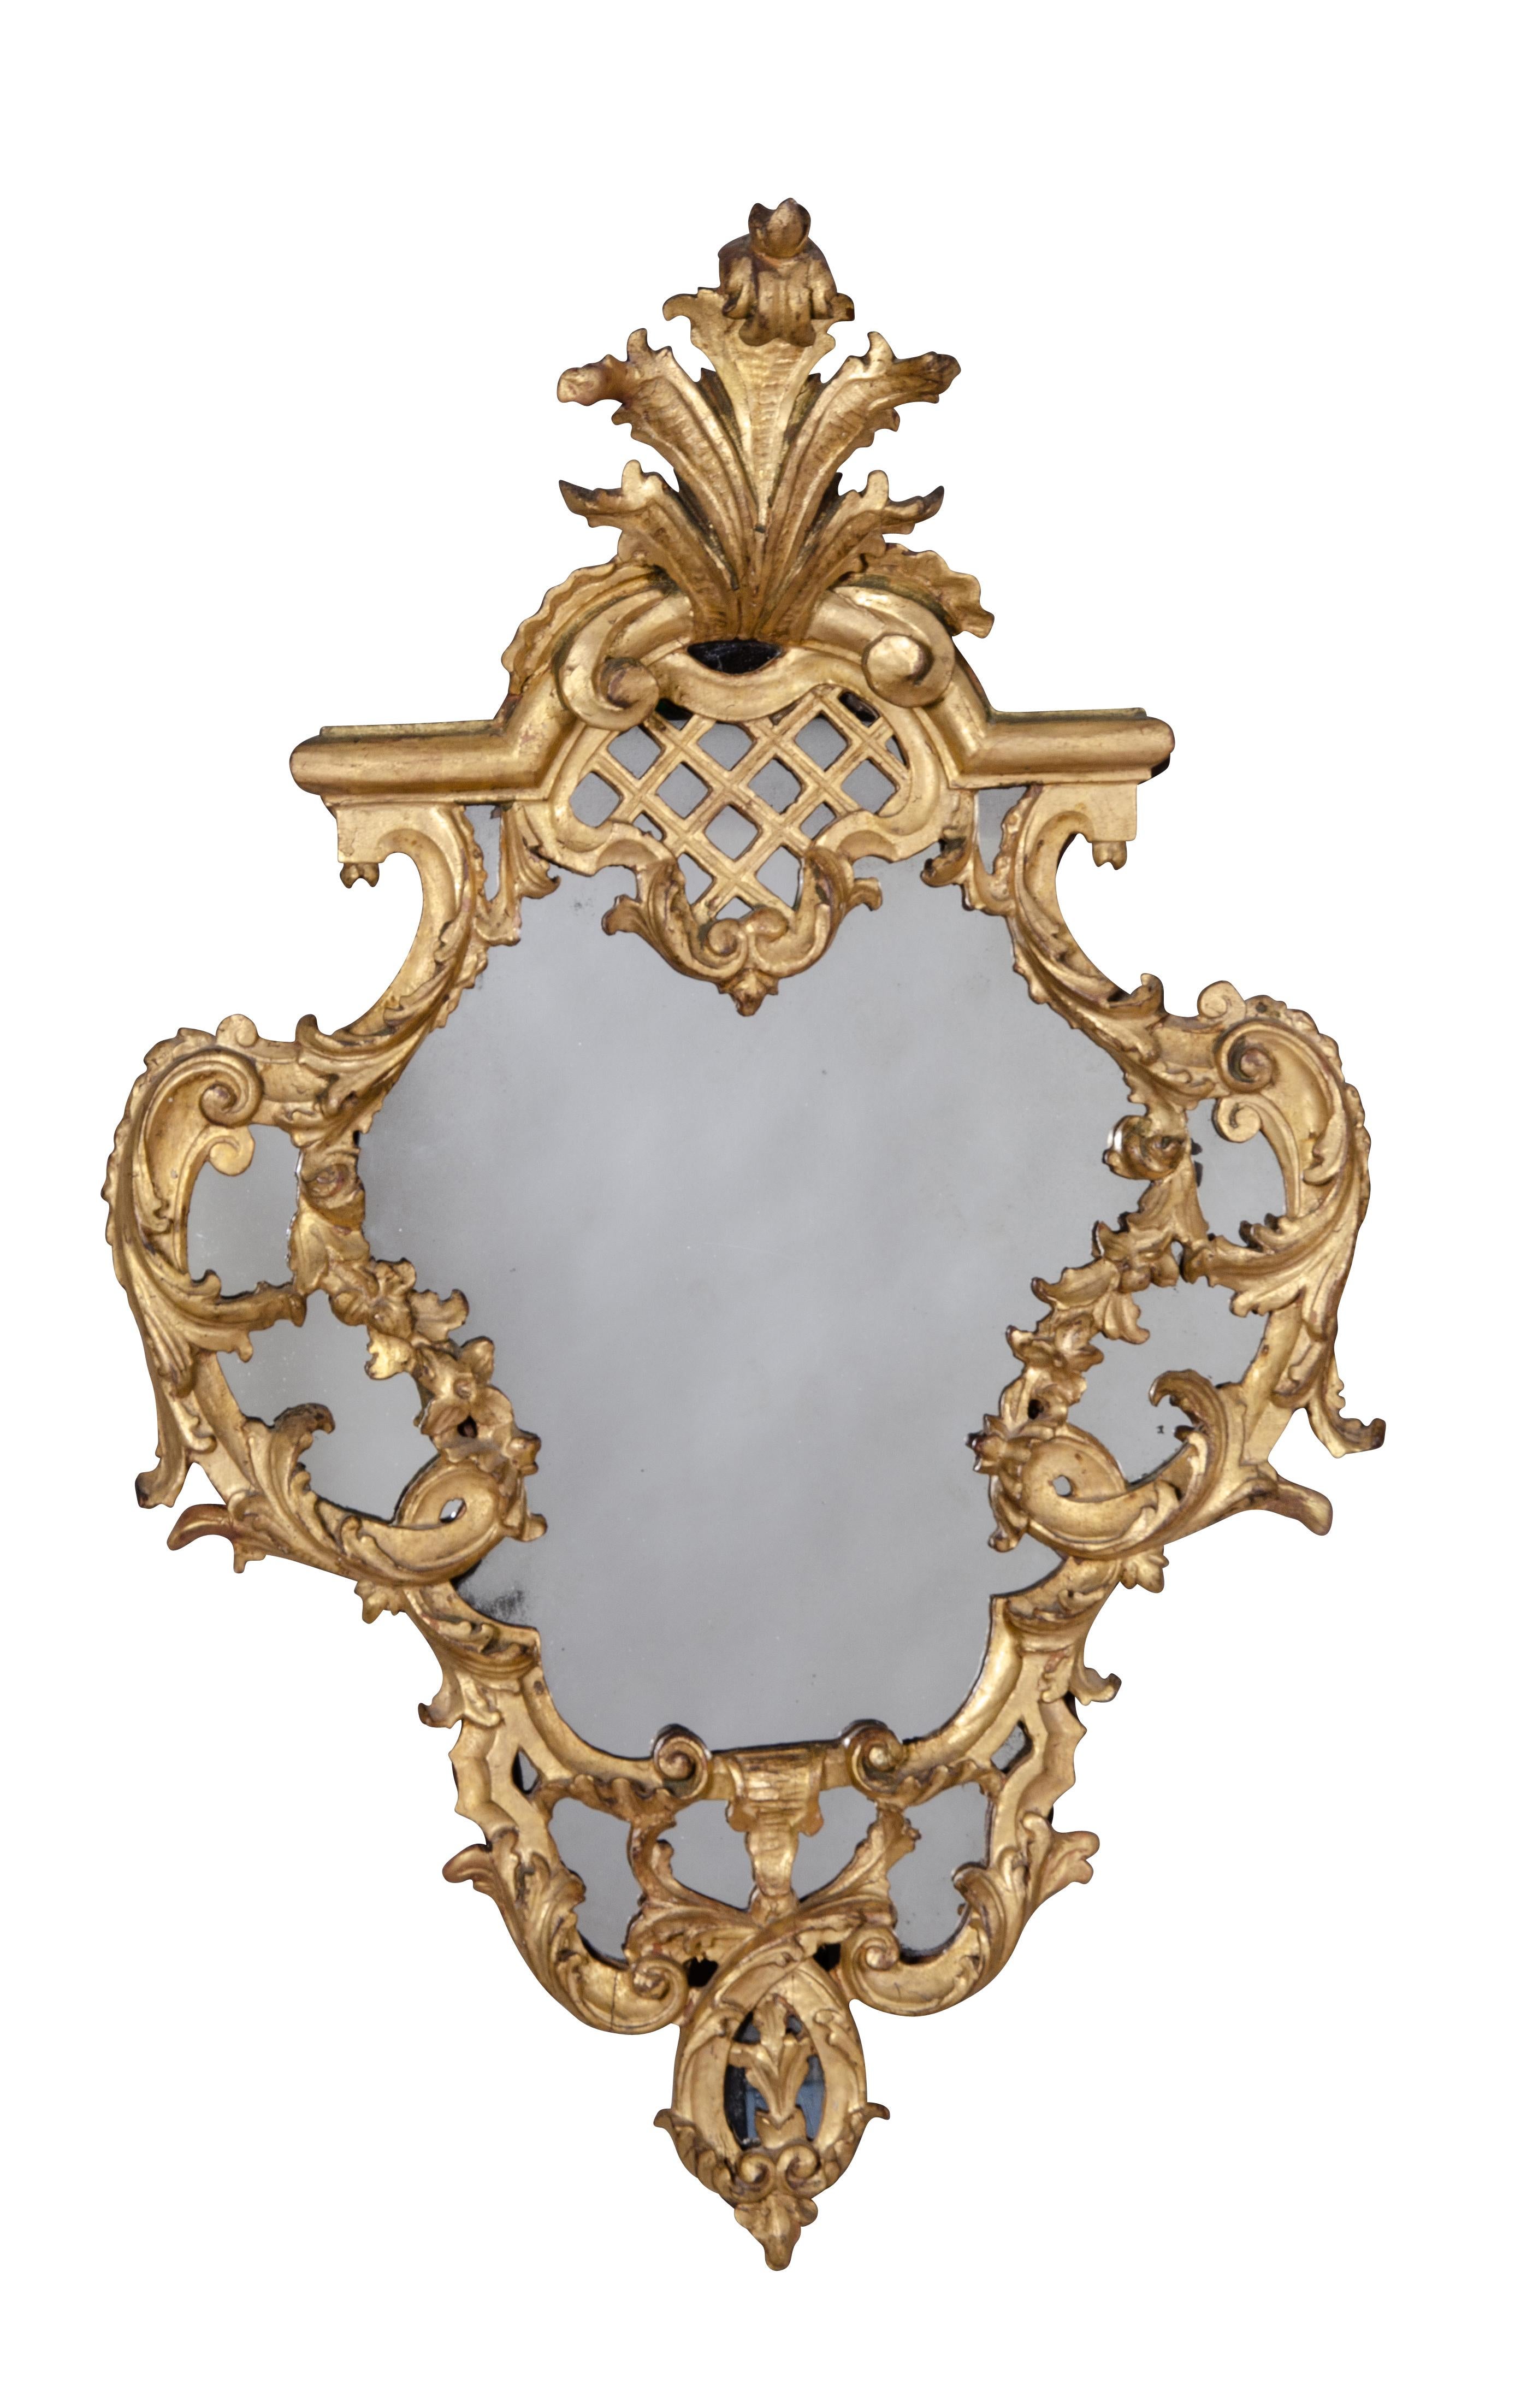 Cartouche shape with leaf crest and mirror palate set in a carved frame with trellis and leaf decoration. Removed from a Bellevue Ave Newport estate occupied by the family for about 100 years.